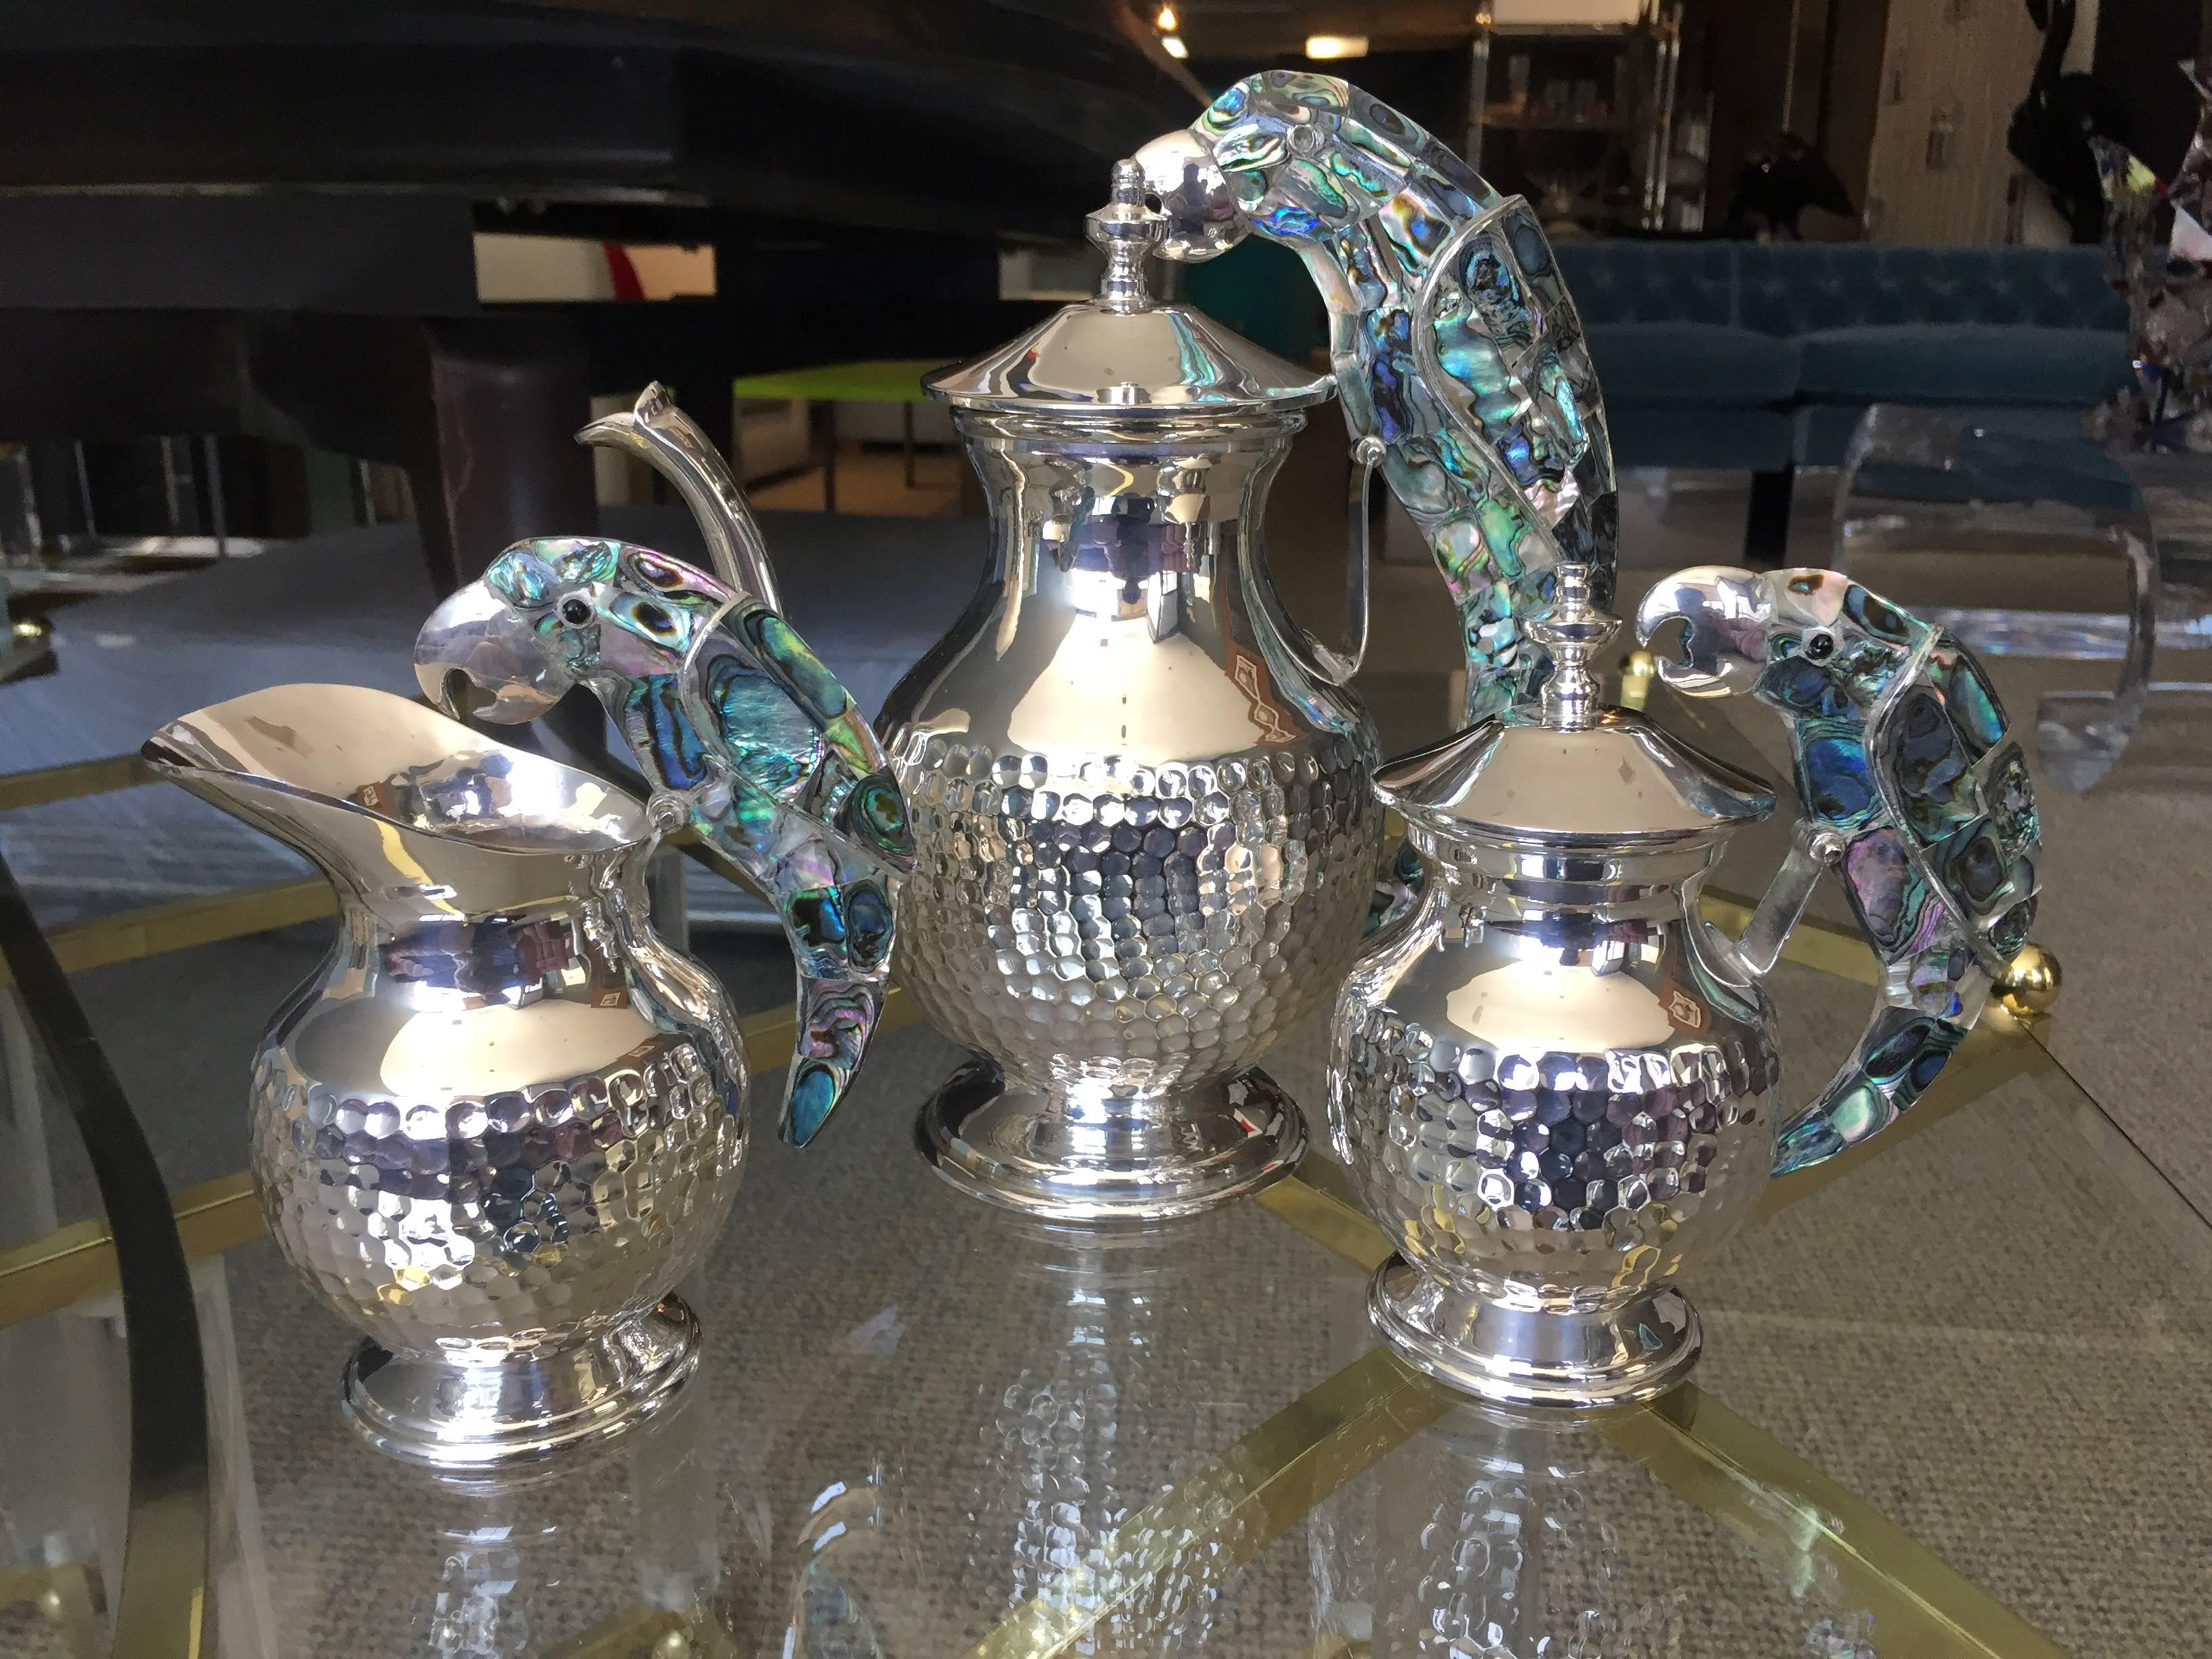 Beautiful and rare tea service set in silver and abalone shell by the renowned silversmiths Los Castillo from Taxco Mexico.
This beautiful set consist of a tea pot a creamer and a sugar pitcher, every piece is beautiful decorated with a parrot